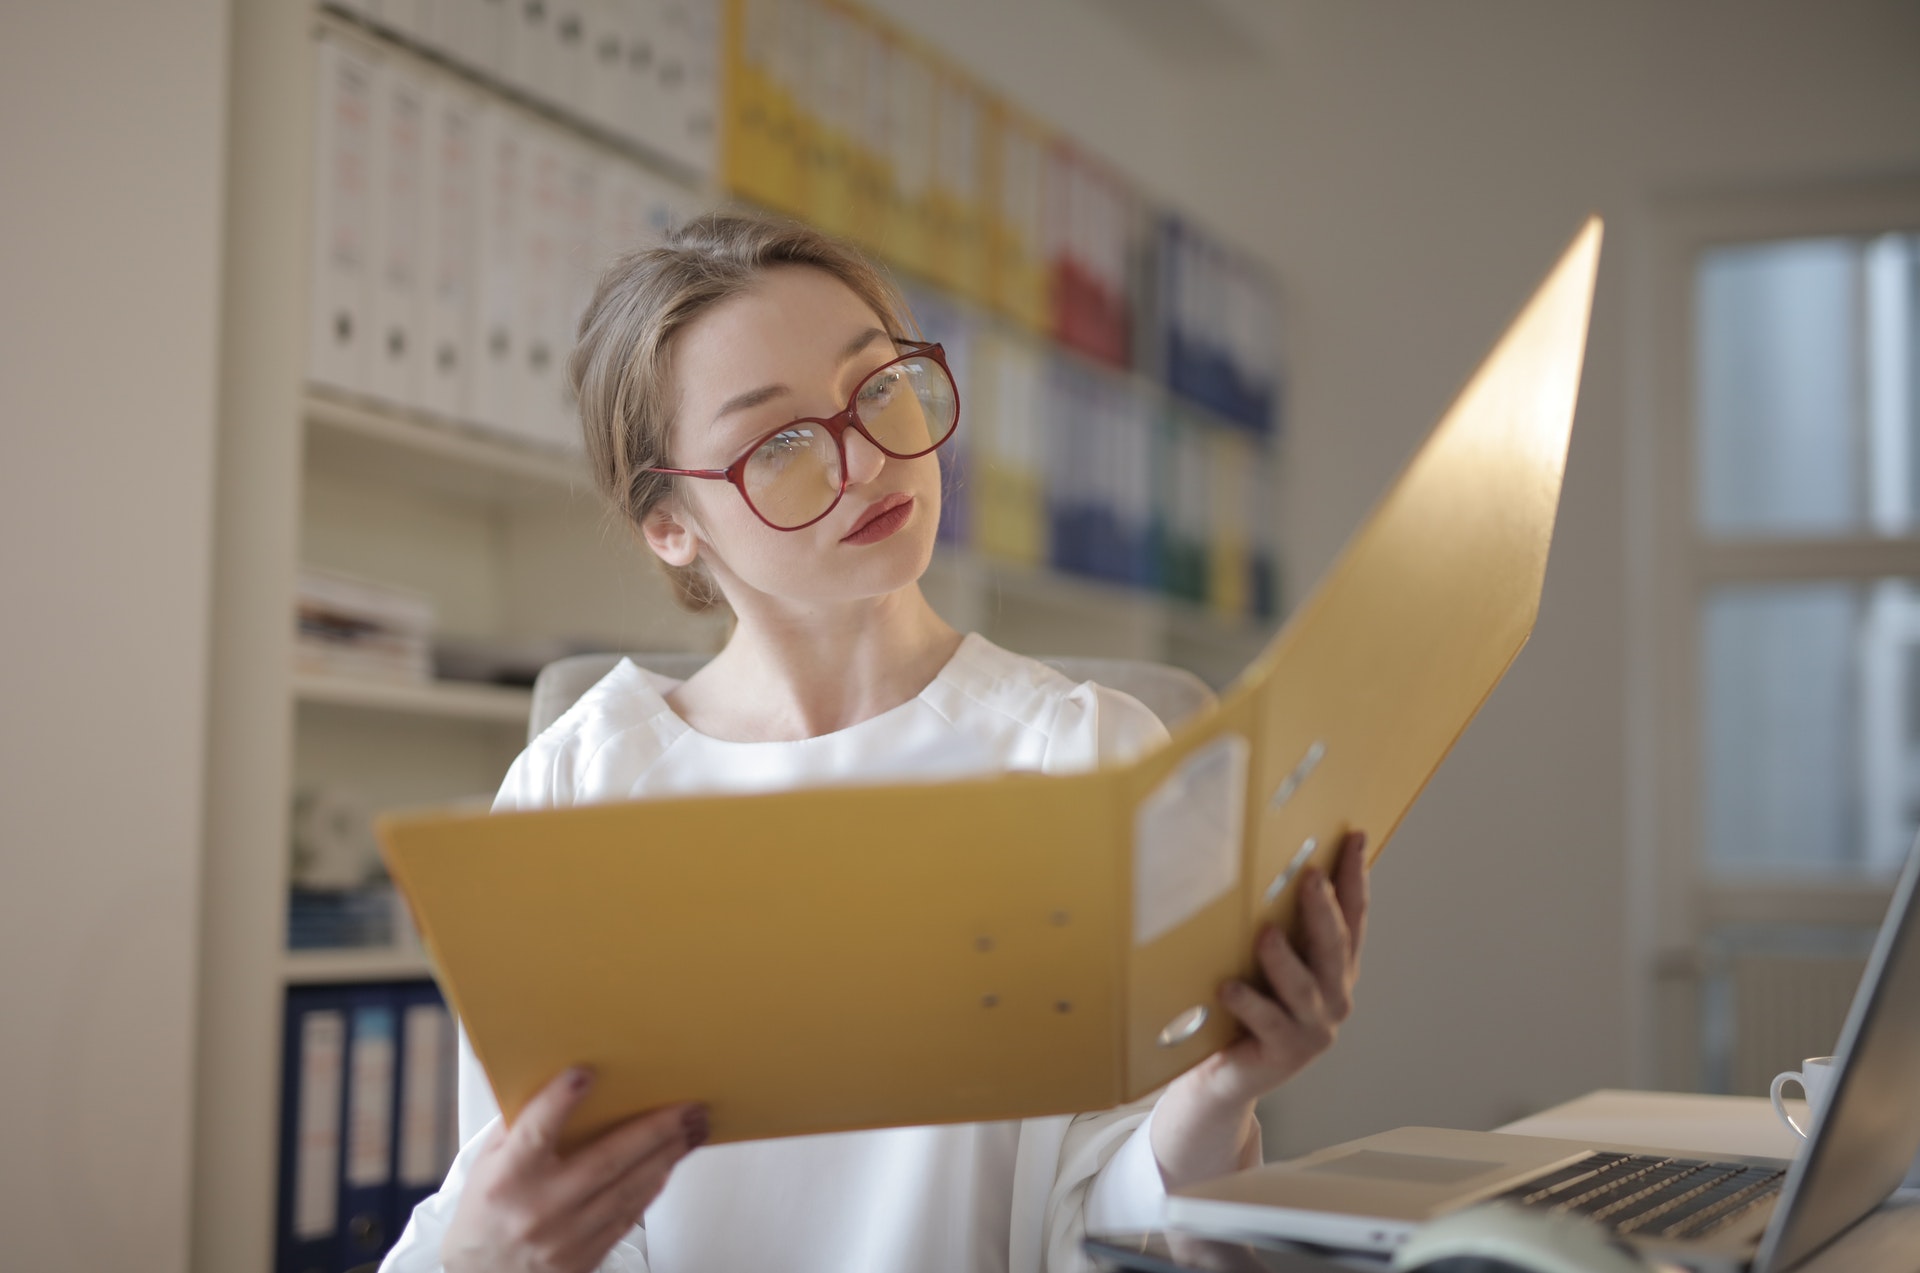 woman with glasses browsing through yellow folder